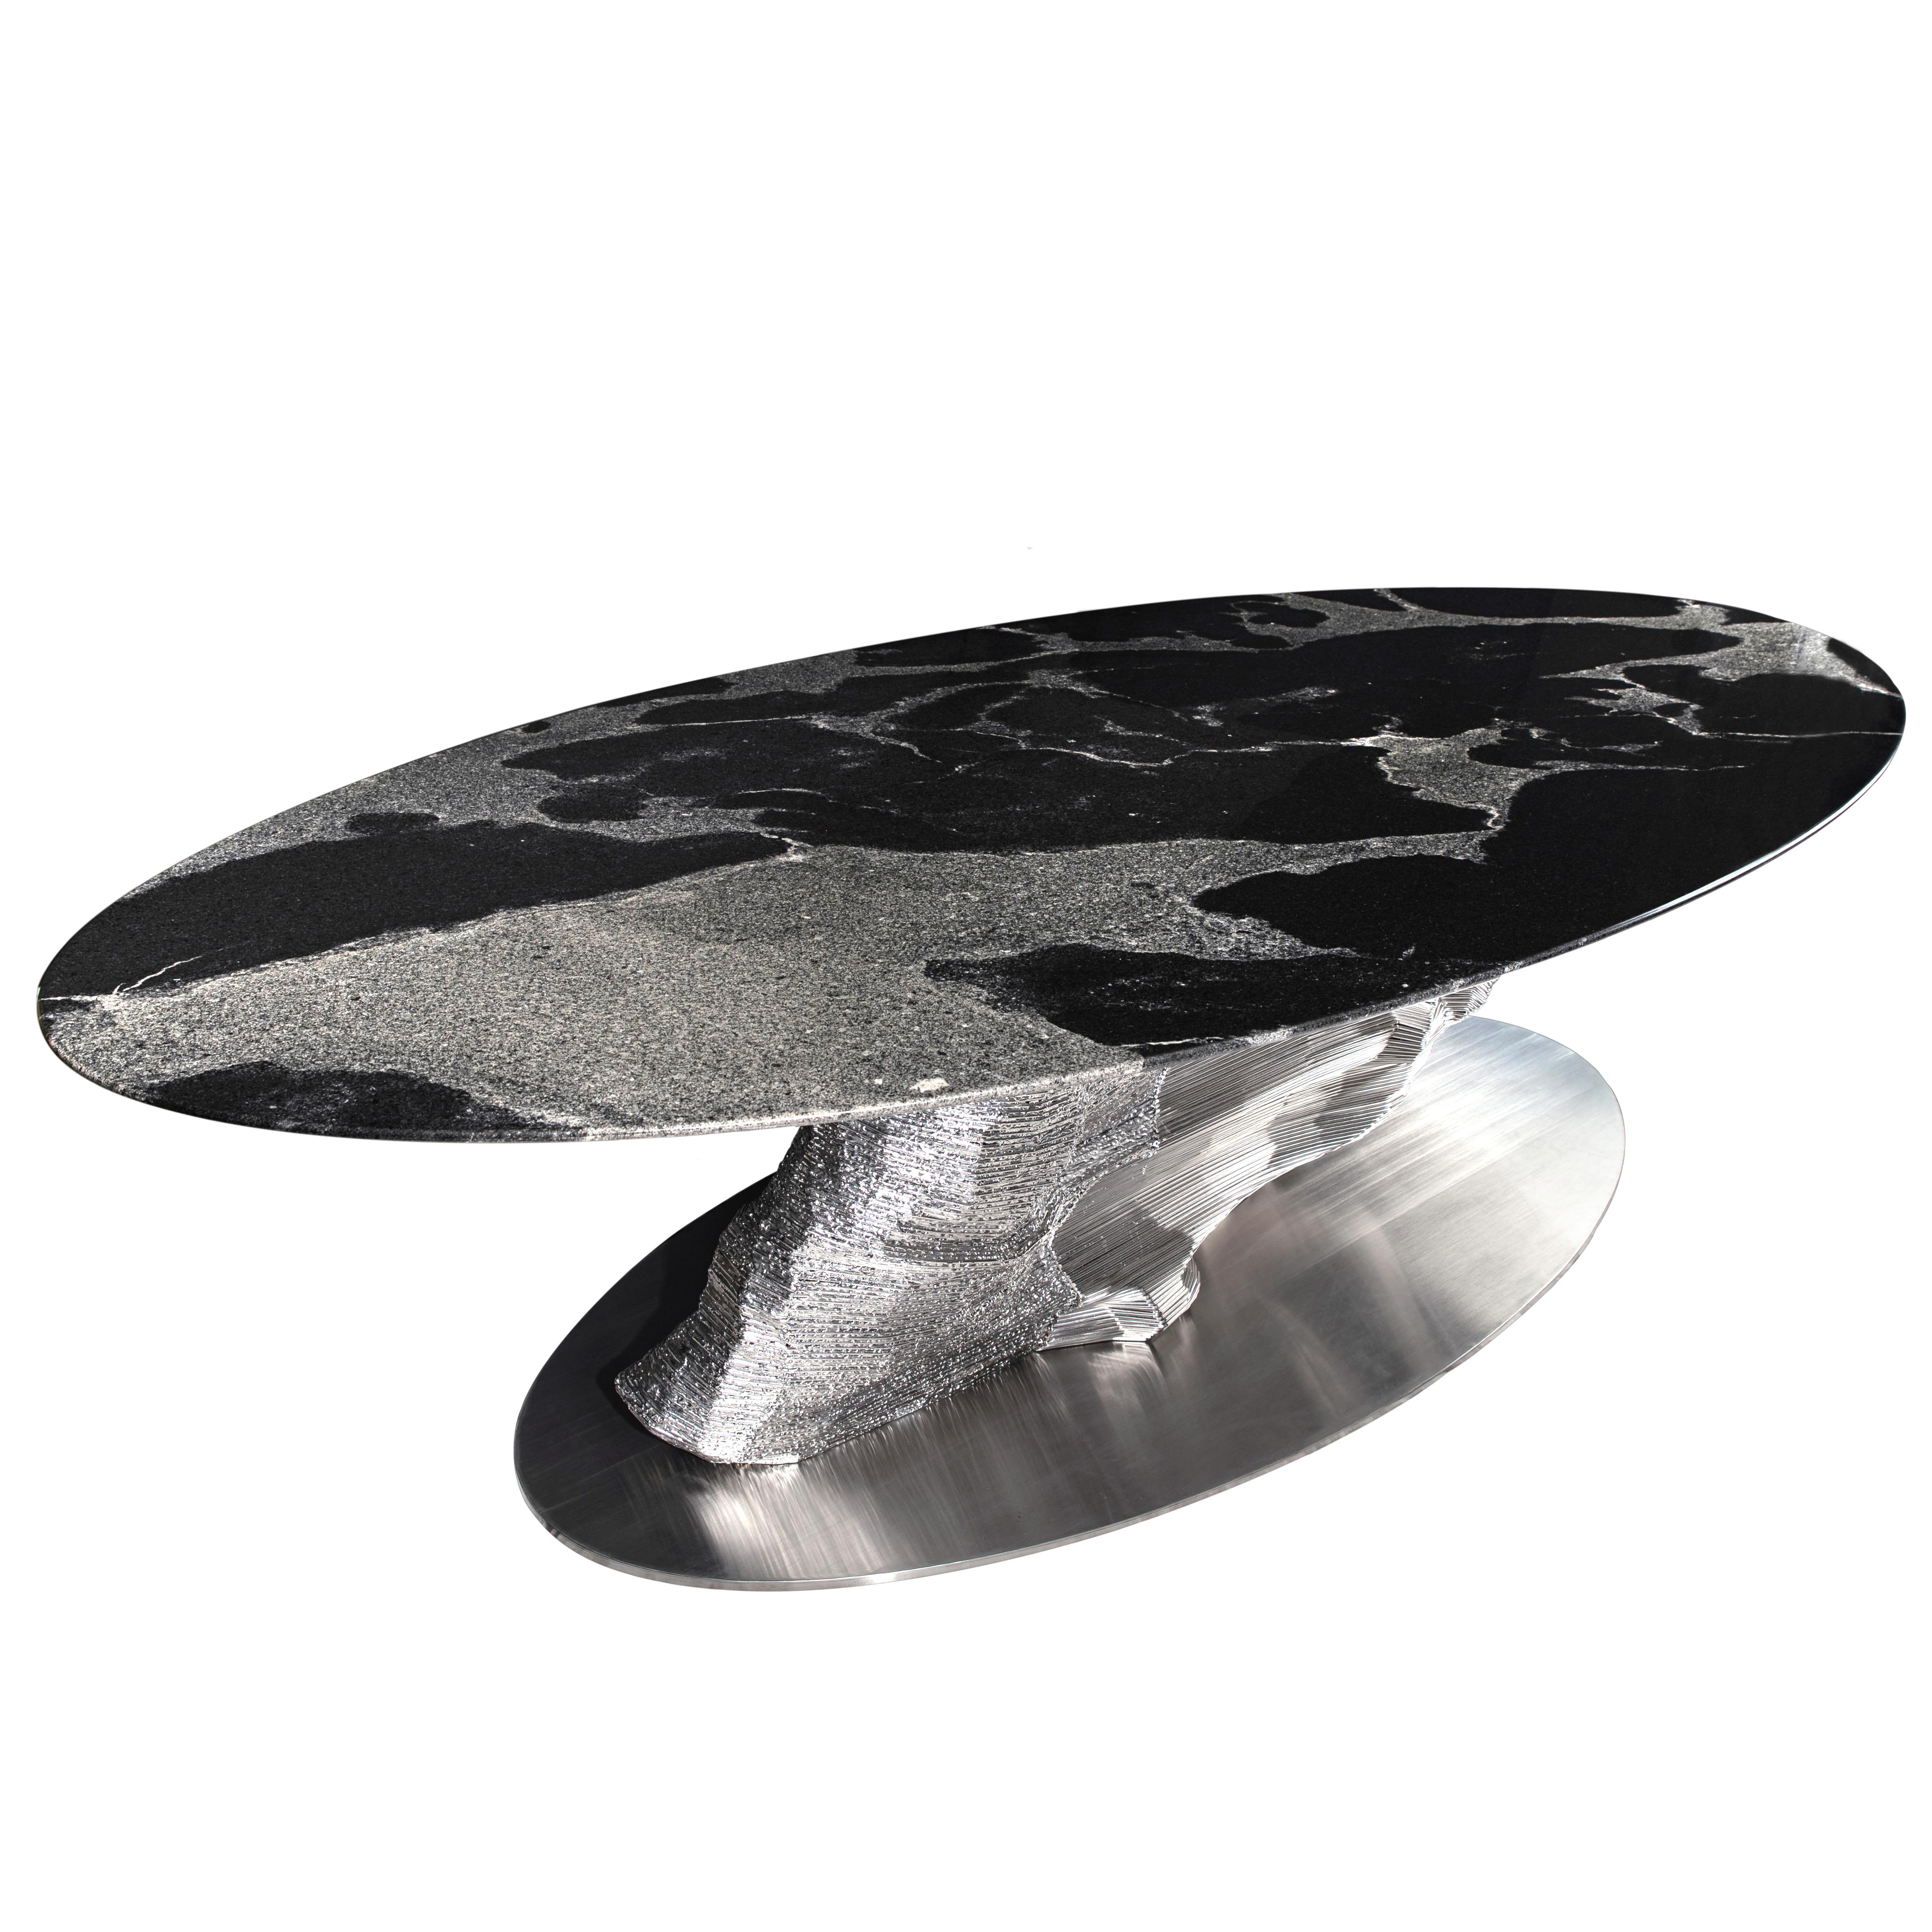 “Meteorite” represent the research of an emotion, a narration of shapes and material that combines the complexity of marble with the strictness of steel. These marble meteors magnify the spaces. Colors and lines create shadows and movement like an